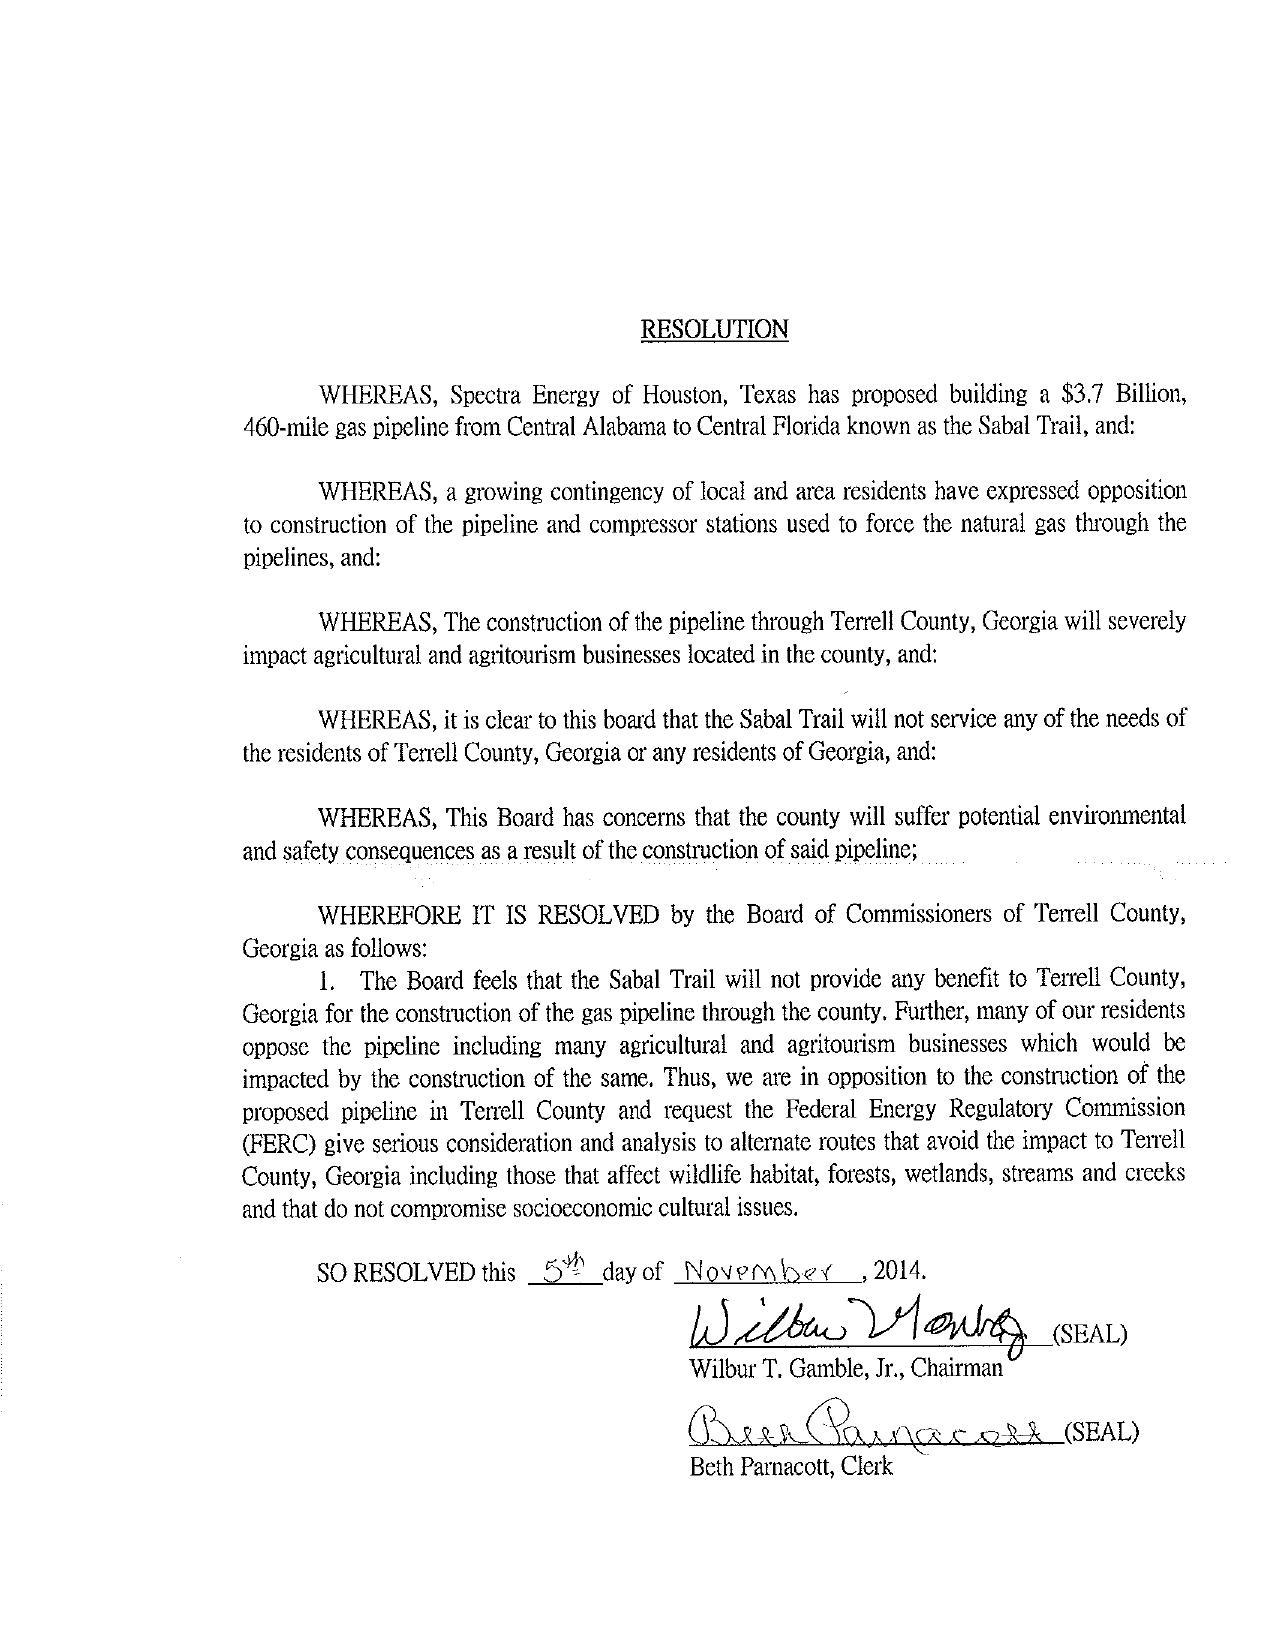 1275x1650 Resolution, in Agriculture over pipeline: Terrell County resolution against Sabal Trail, by John S. Quarterman, for SpectraBusters.org, 5 November 2014